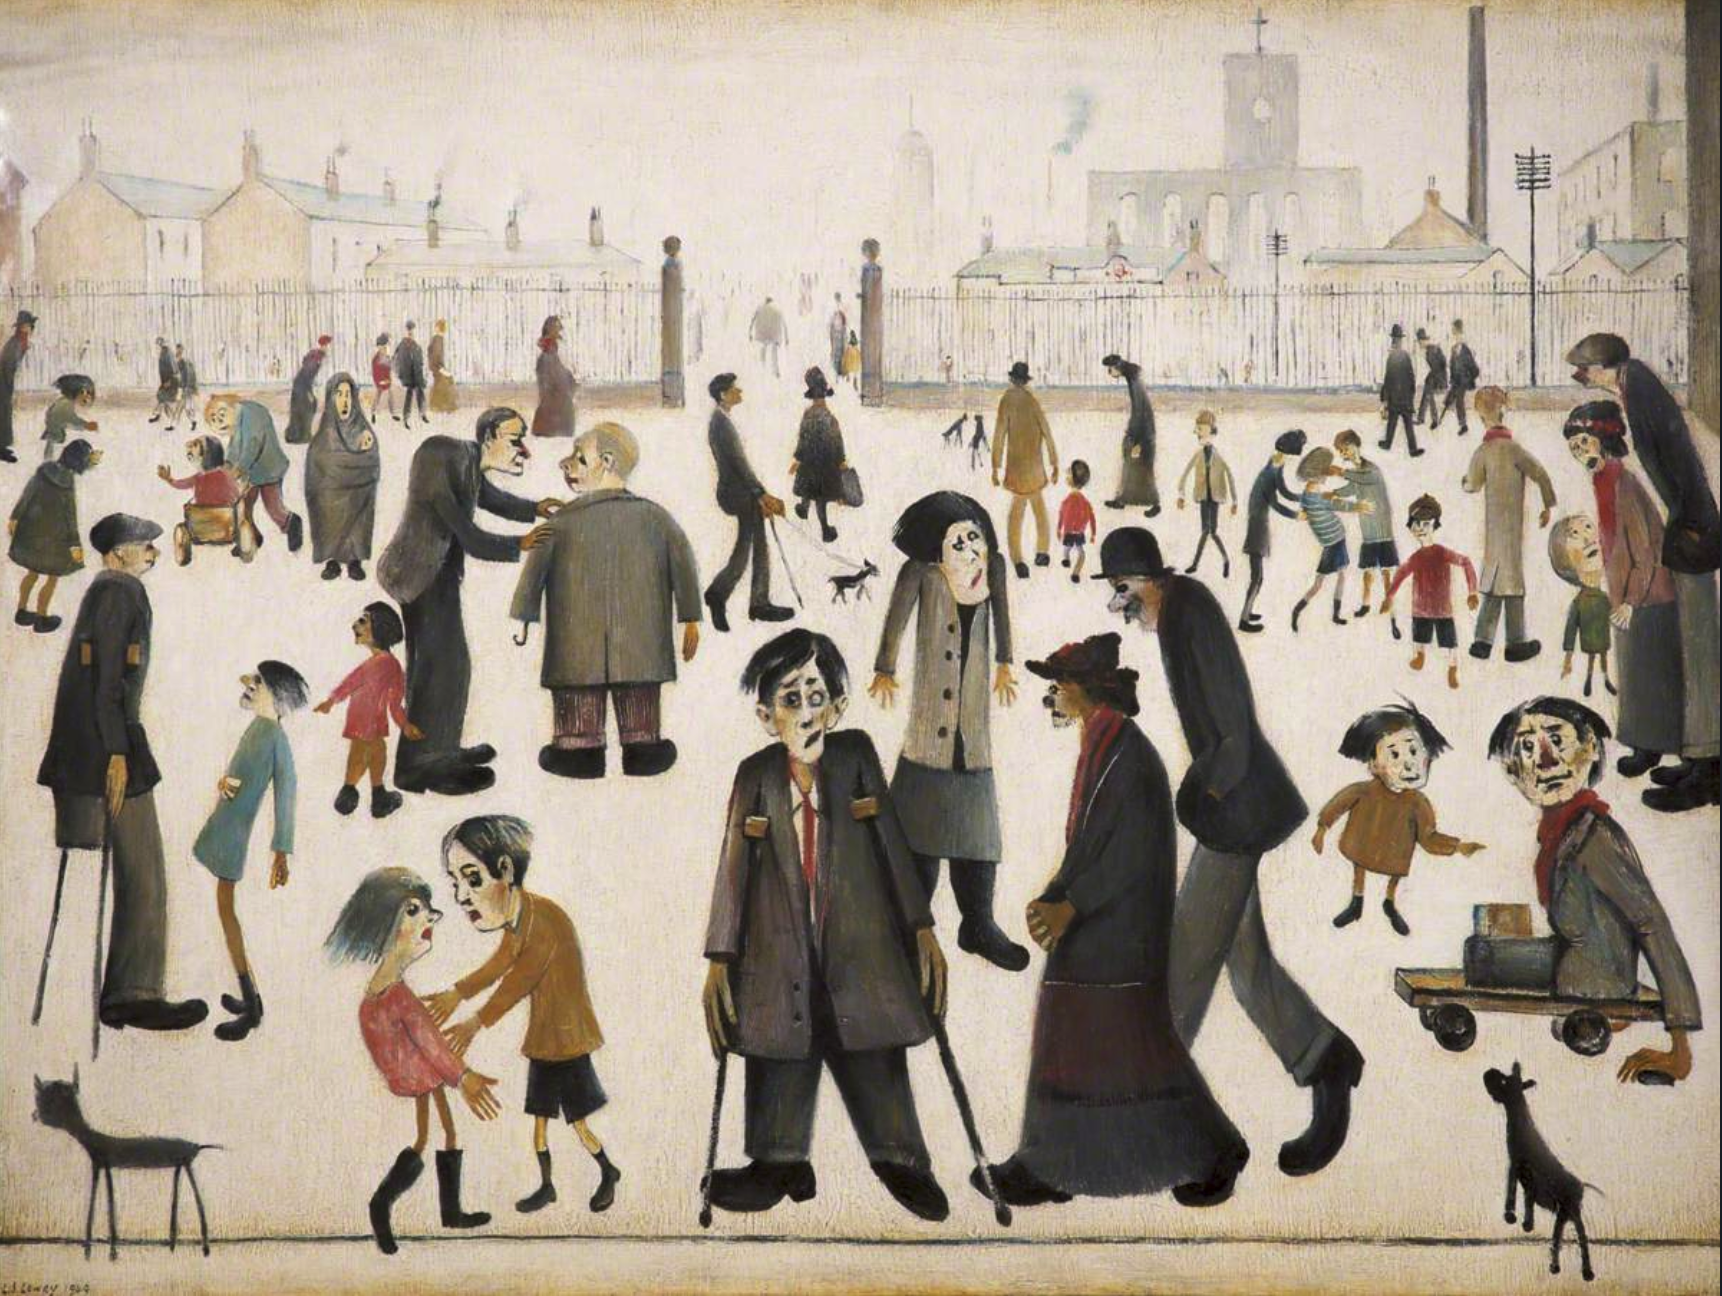 The Cripples (1949) by Laurence Stephen Lowry (1887 - 1976), English artist.